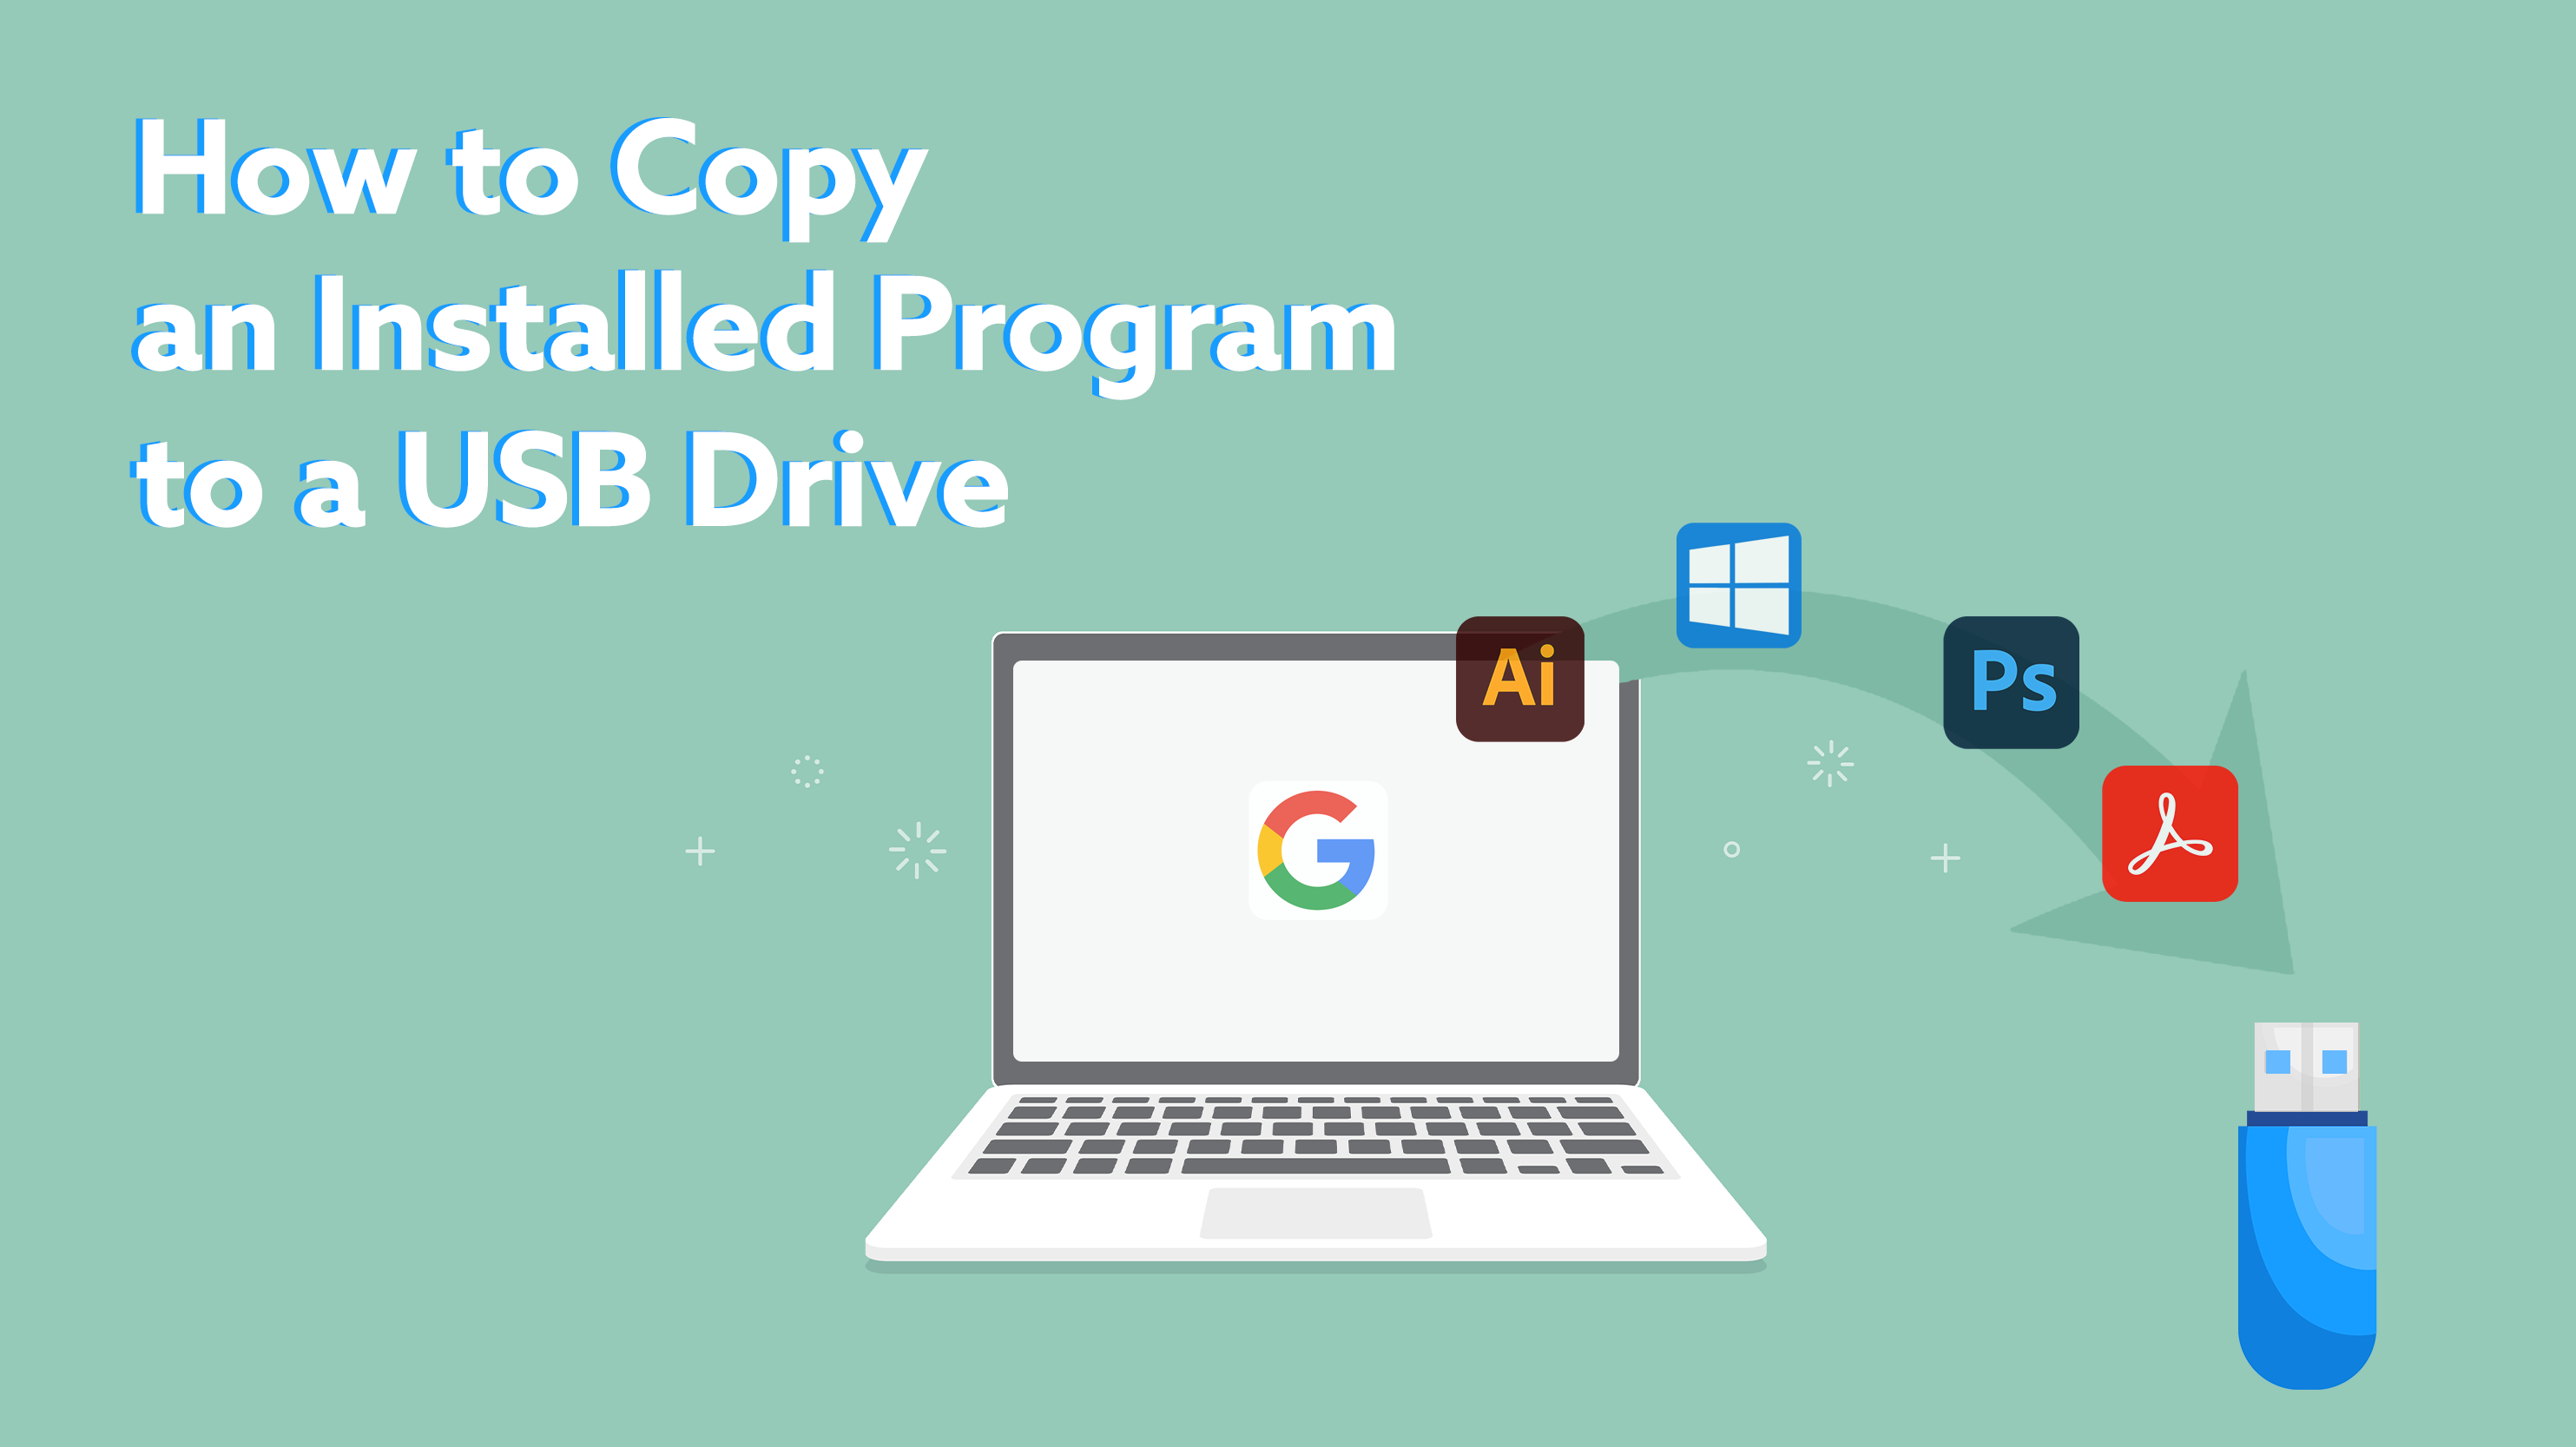 How to Copy an Installed Program to a USB Drive